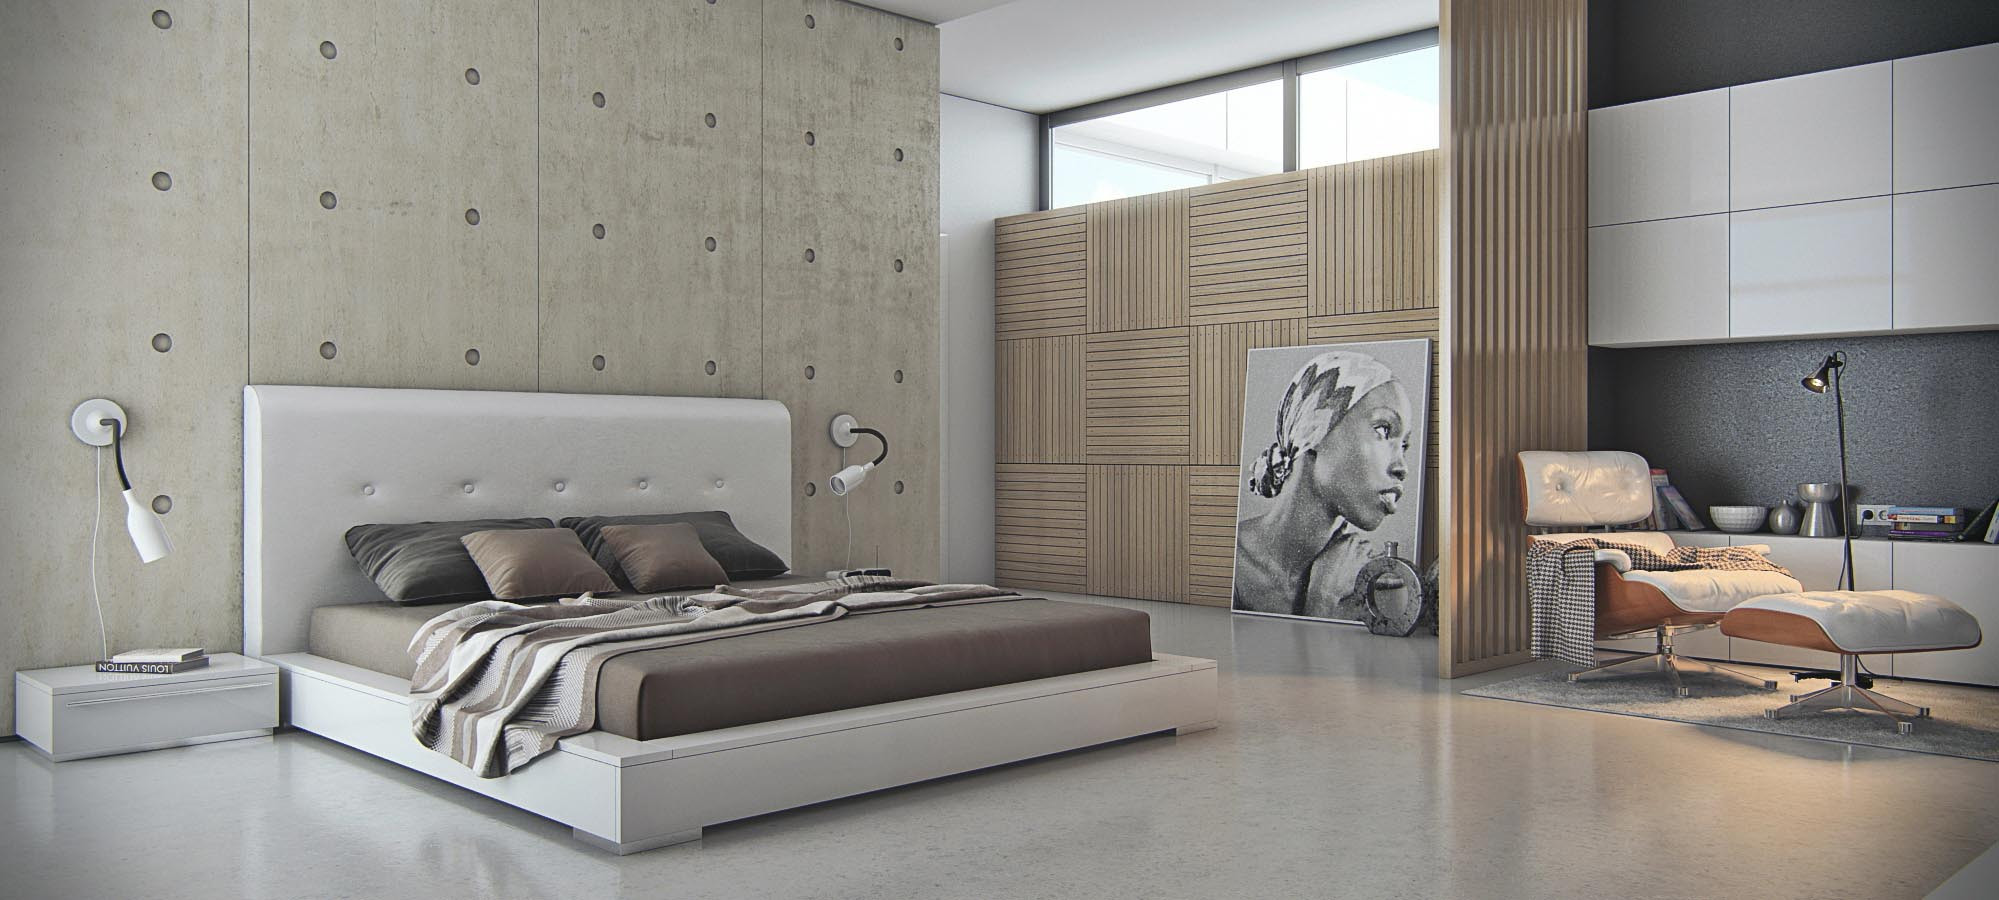 Bedroom Feature Wall Ideas
 Should I Have Polished Concrete Floors Mad About The House